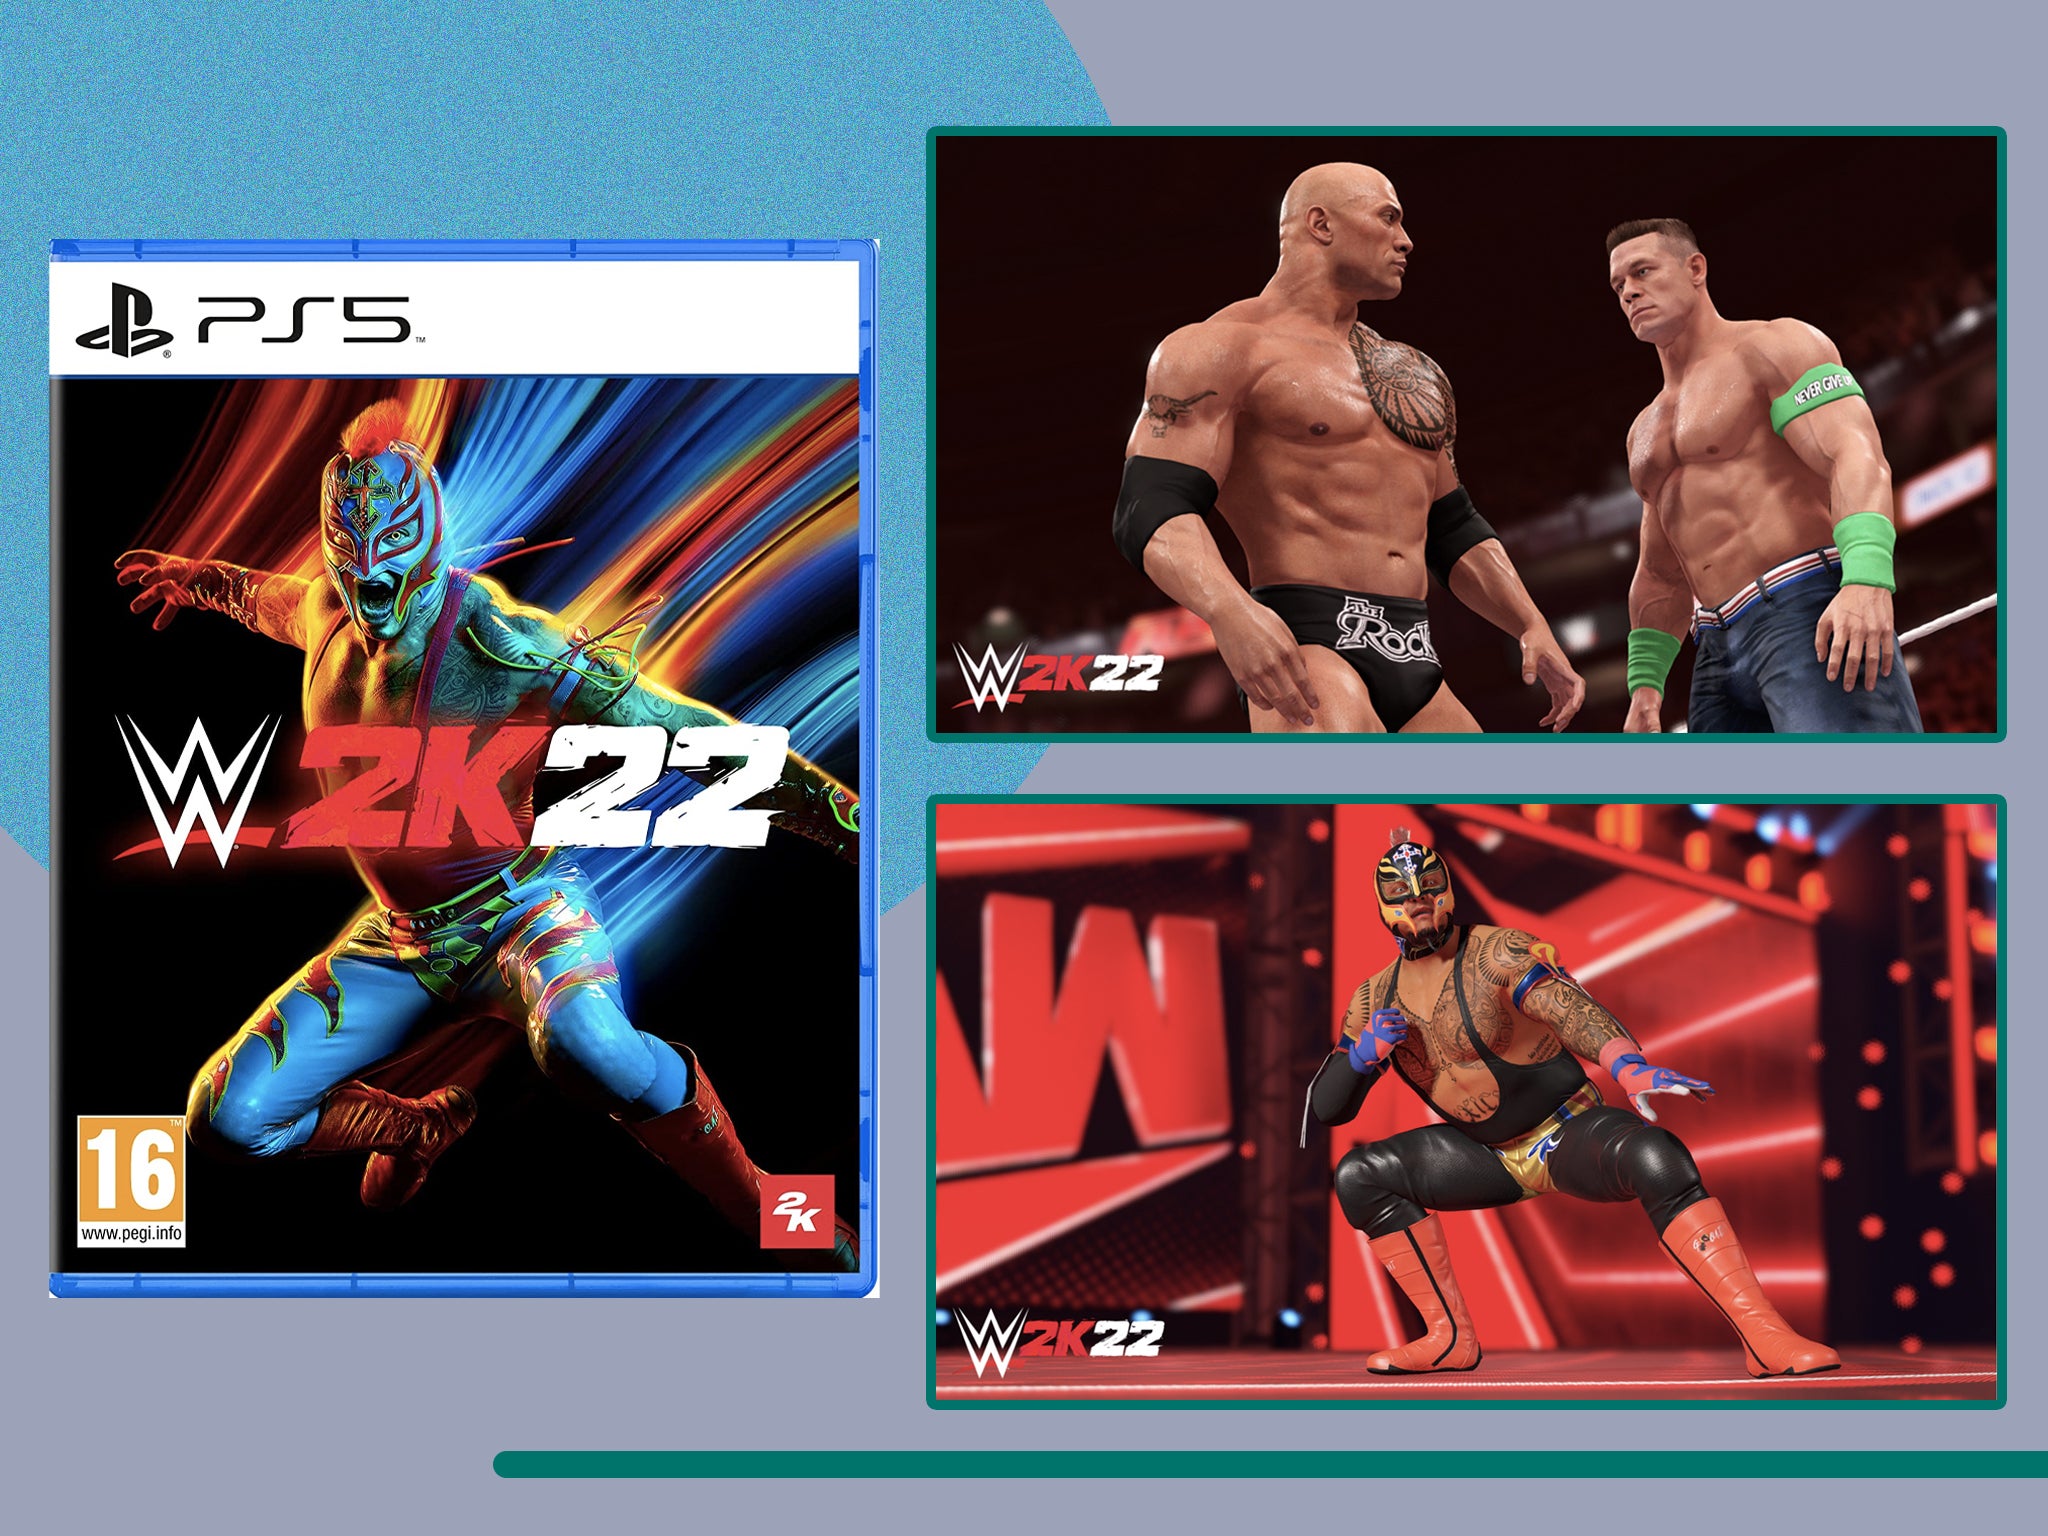 ‘WWE 2K22’ Release date, preorder deals and which wrestlers will be